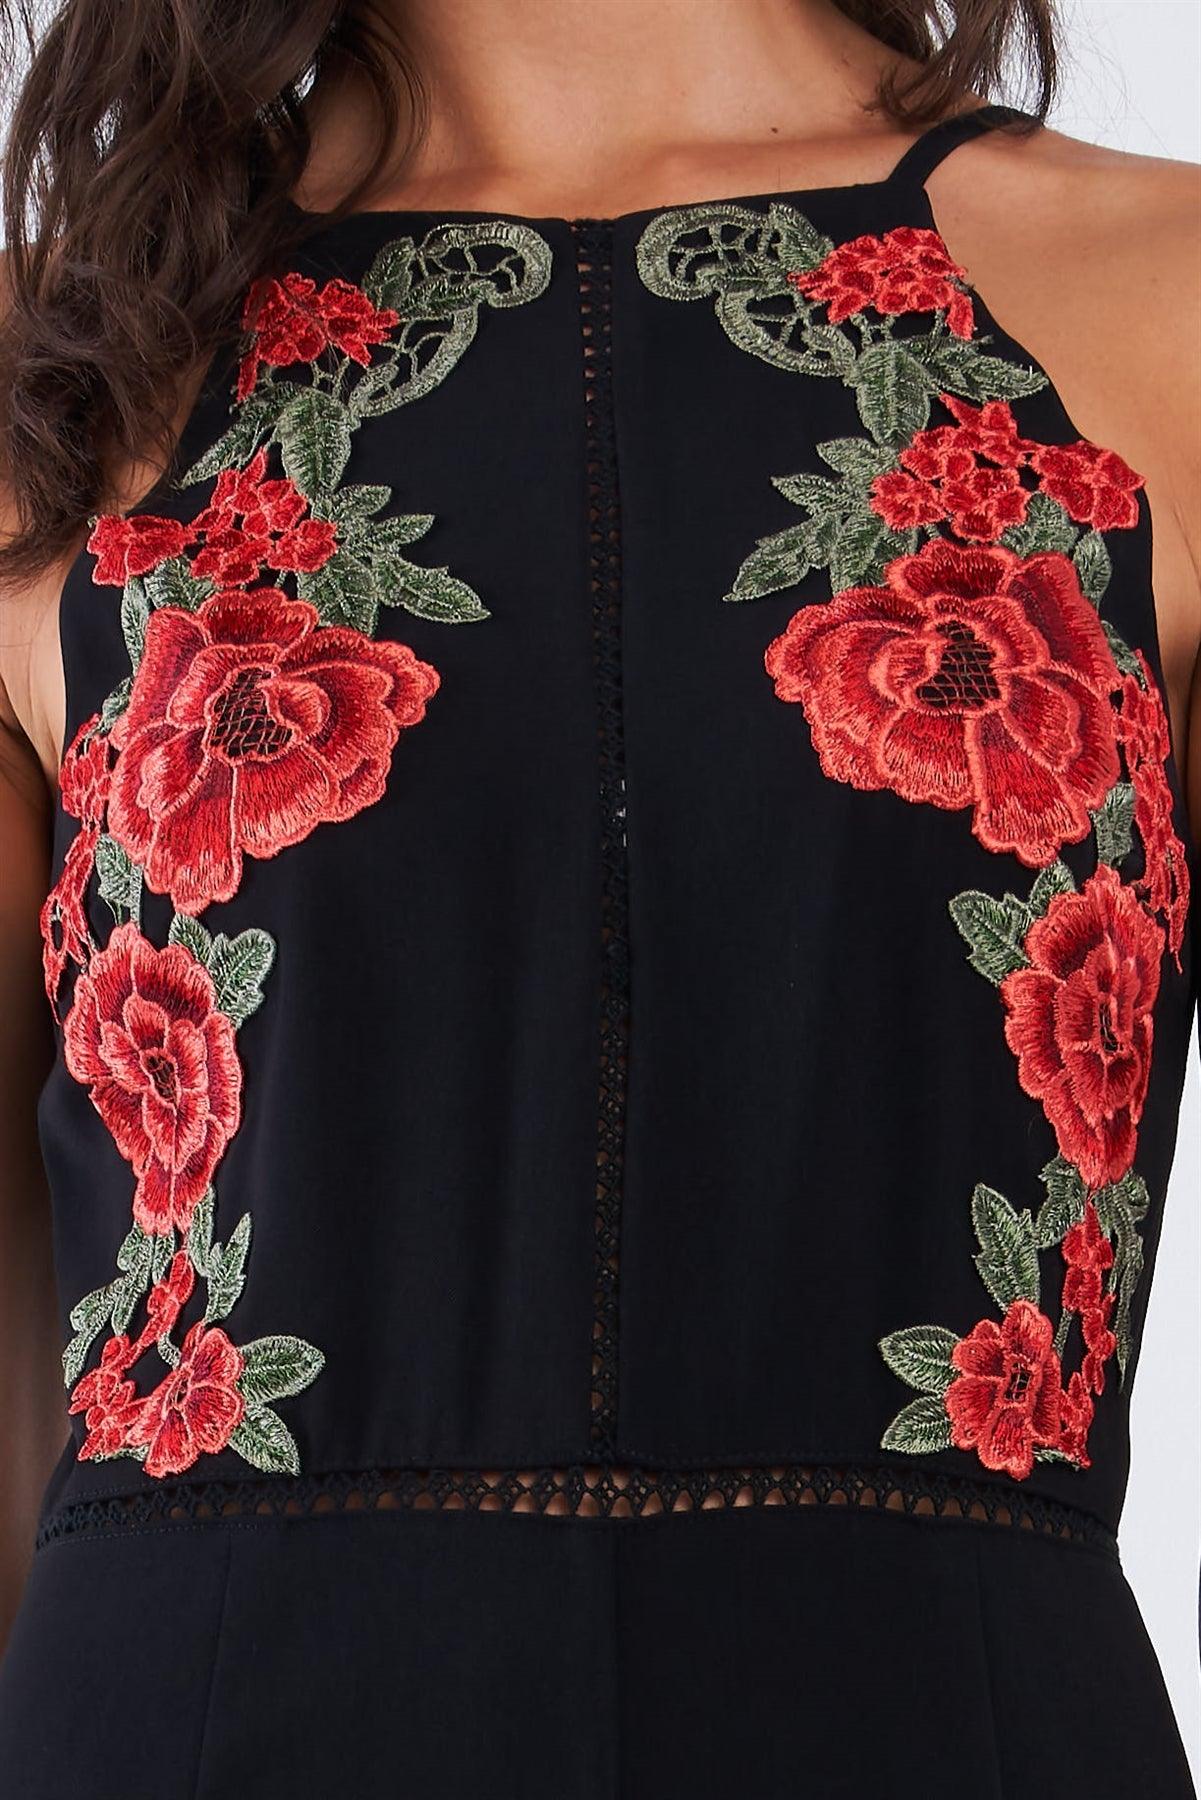 Black Sophisticated Floral Embroidered Sleeveless Wide Leg Jumpsuit